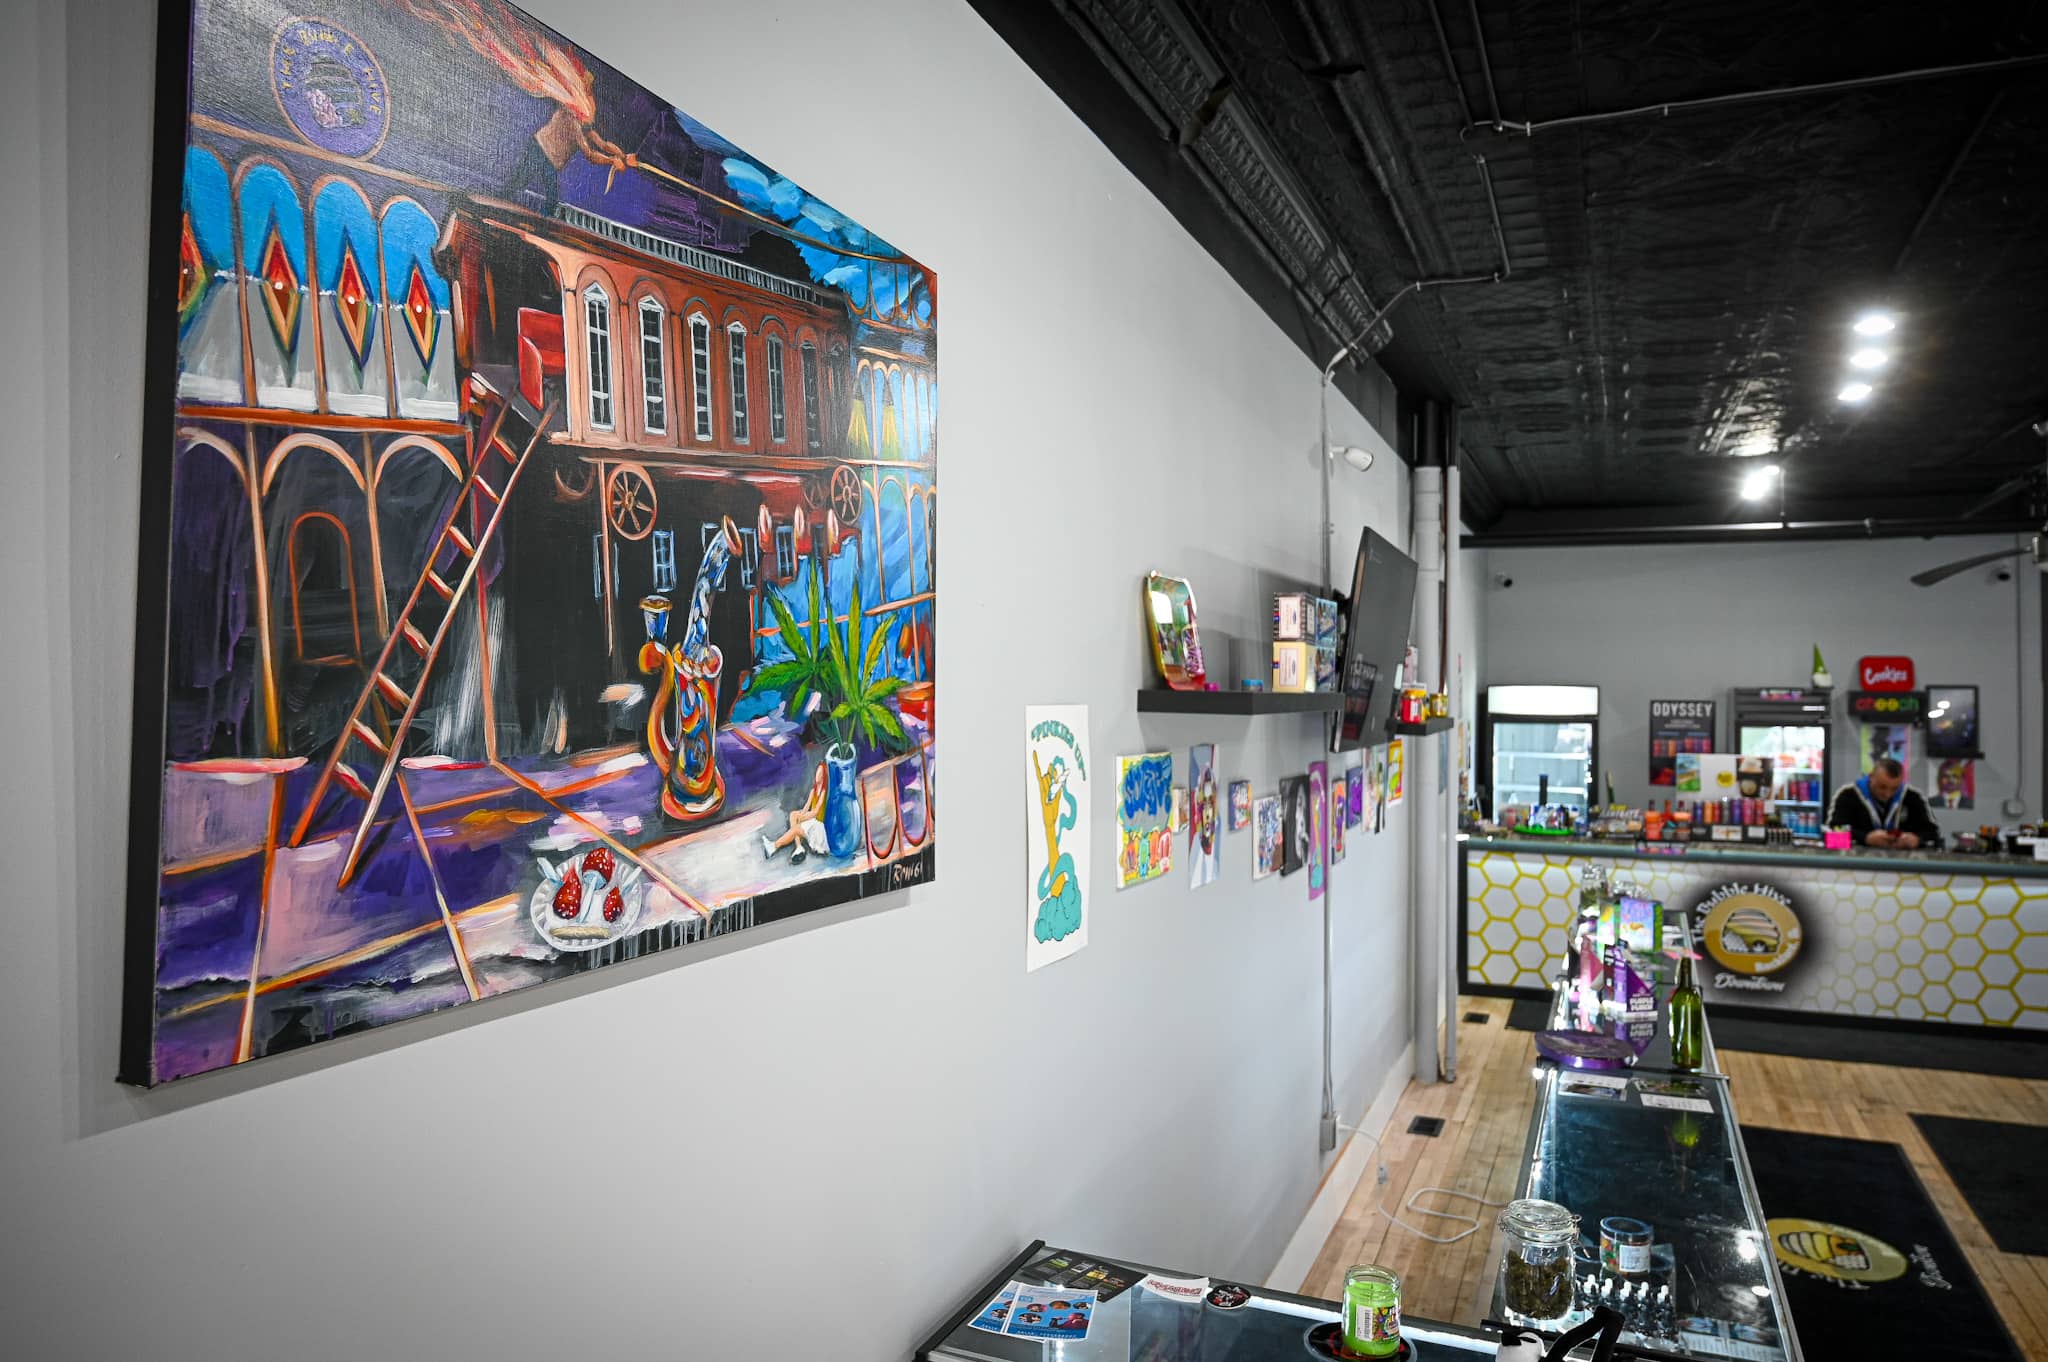 Rockford Art Deli celebrates 10 years in downtown store, Positive Local  News